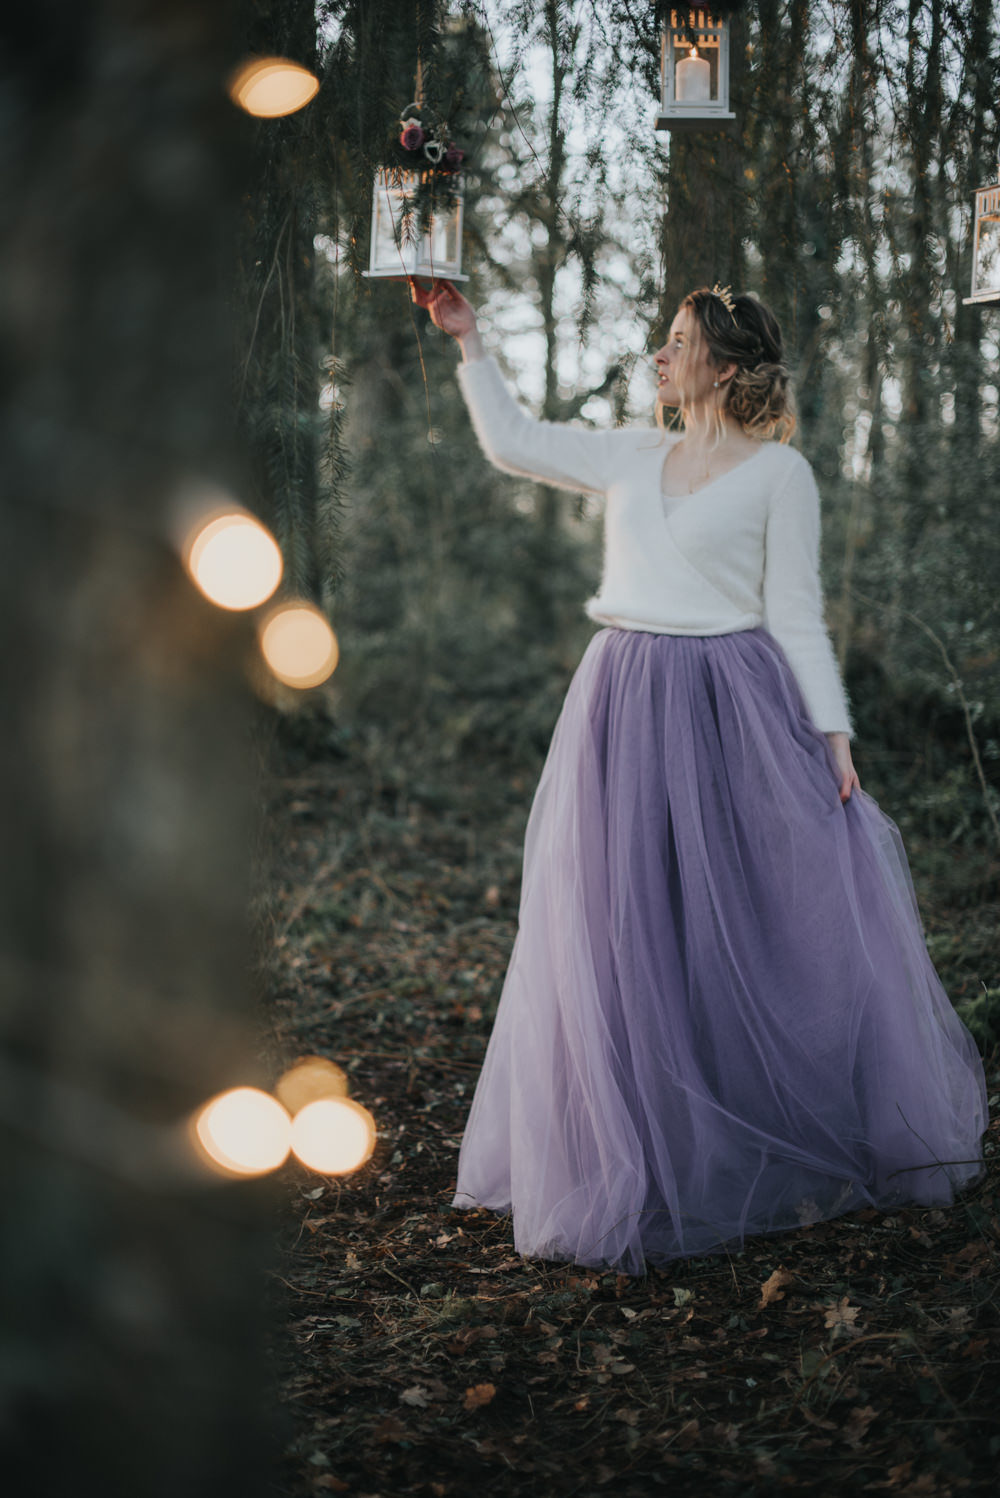  Mariage d'hiver "Somewhere in The Woods" - Blog Mariage Madame C